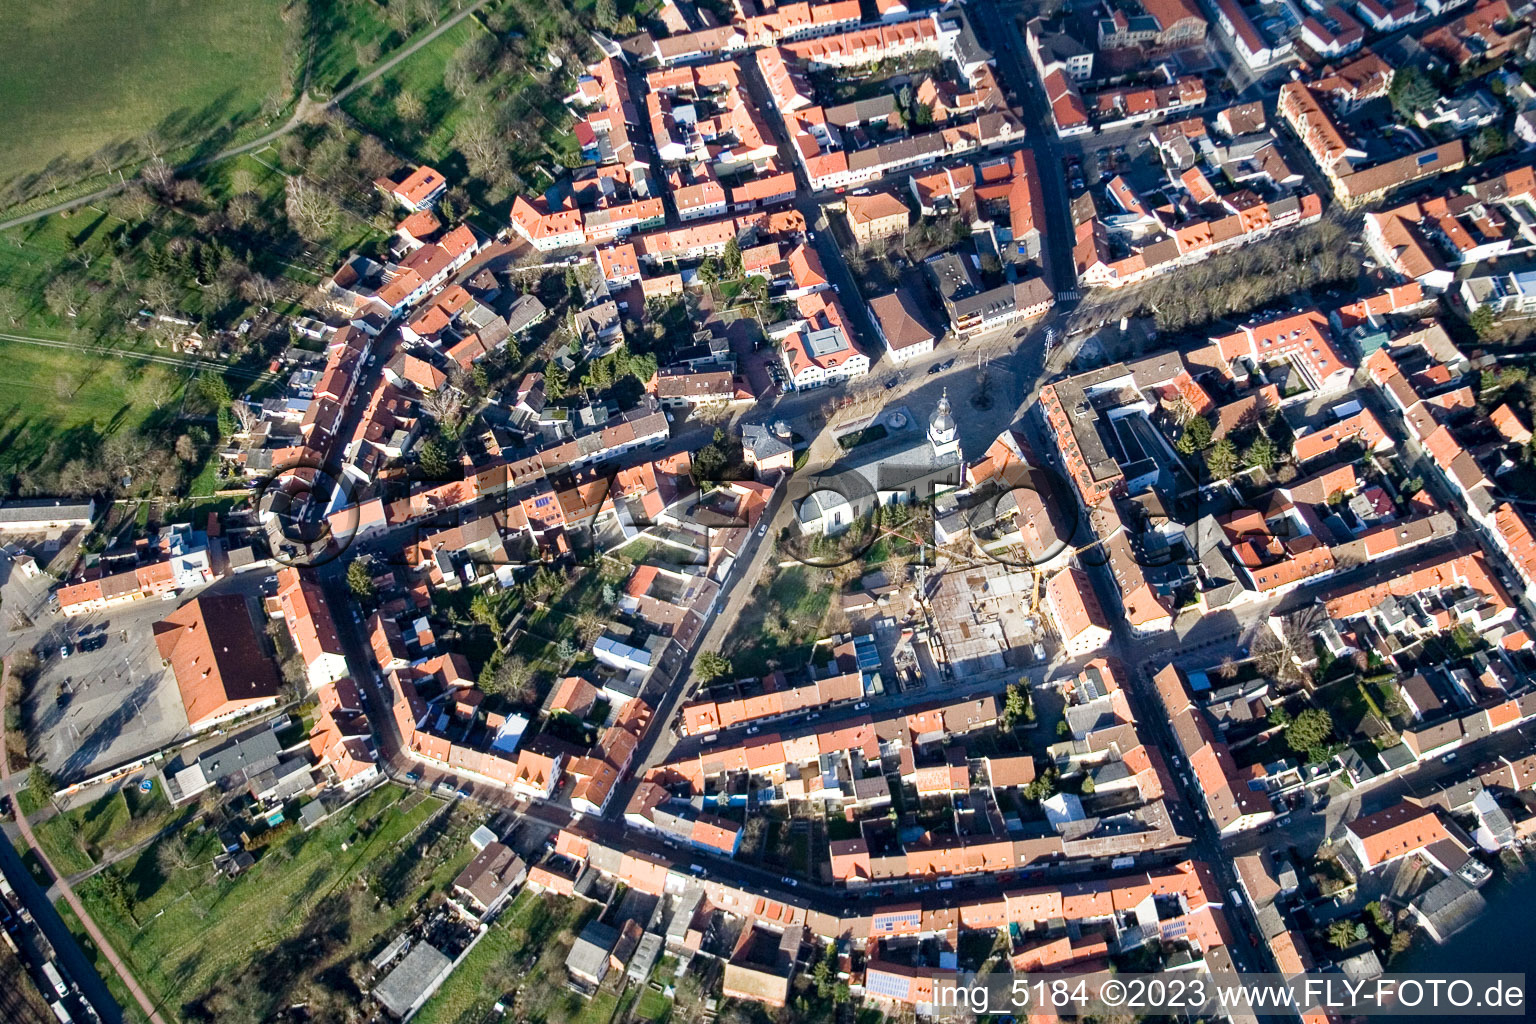 Philippsburg in the state Baden-Wuerttemberg, Germany from above